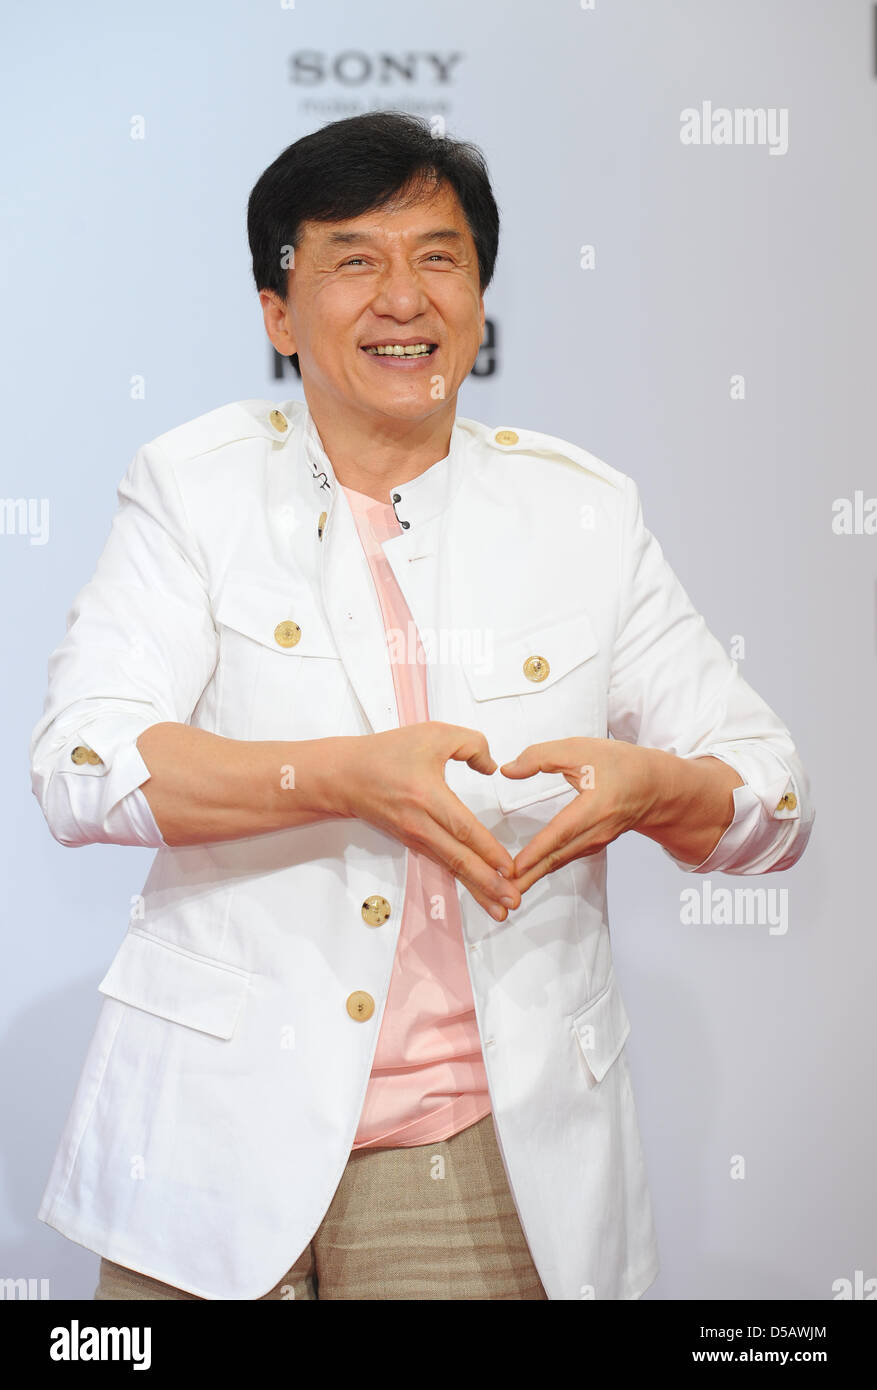 Hong Kong-born actor Jackie Chan poses on the red carpet at the premiere of 'Karate Kid' in front of the Cinestar movie theatre in Berlin, Germany, 19 July 2010. The film will be shown in German cinemas starting 22 July 2010. Photo: Jens Kalaene Stock Photo